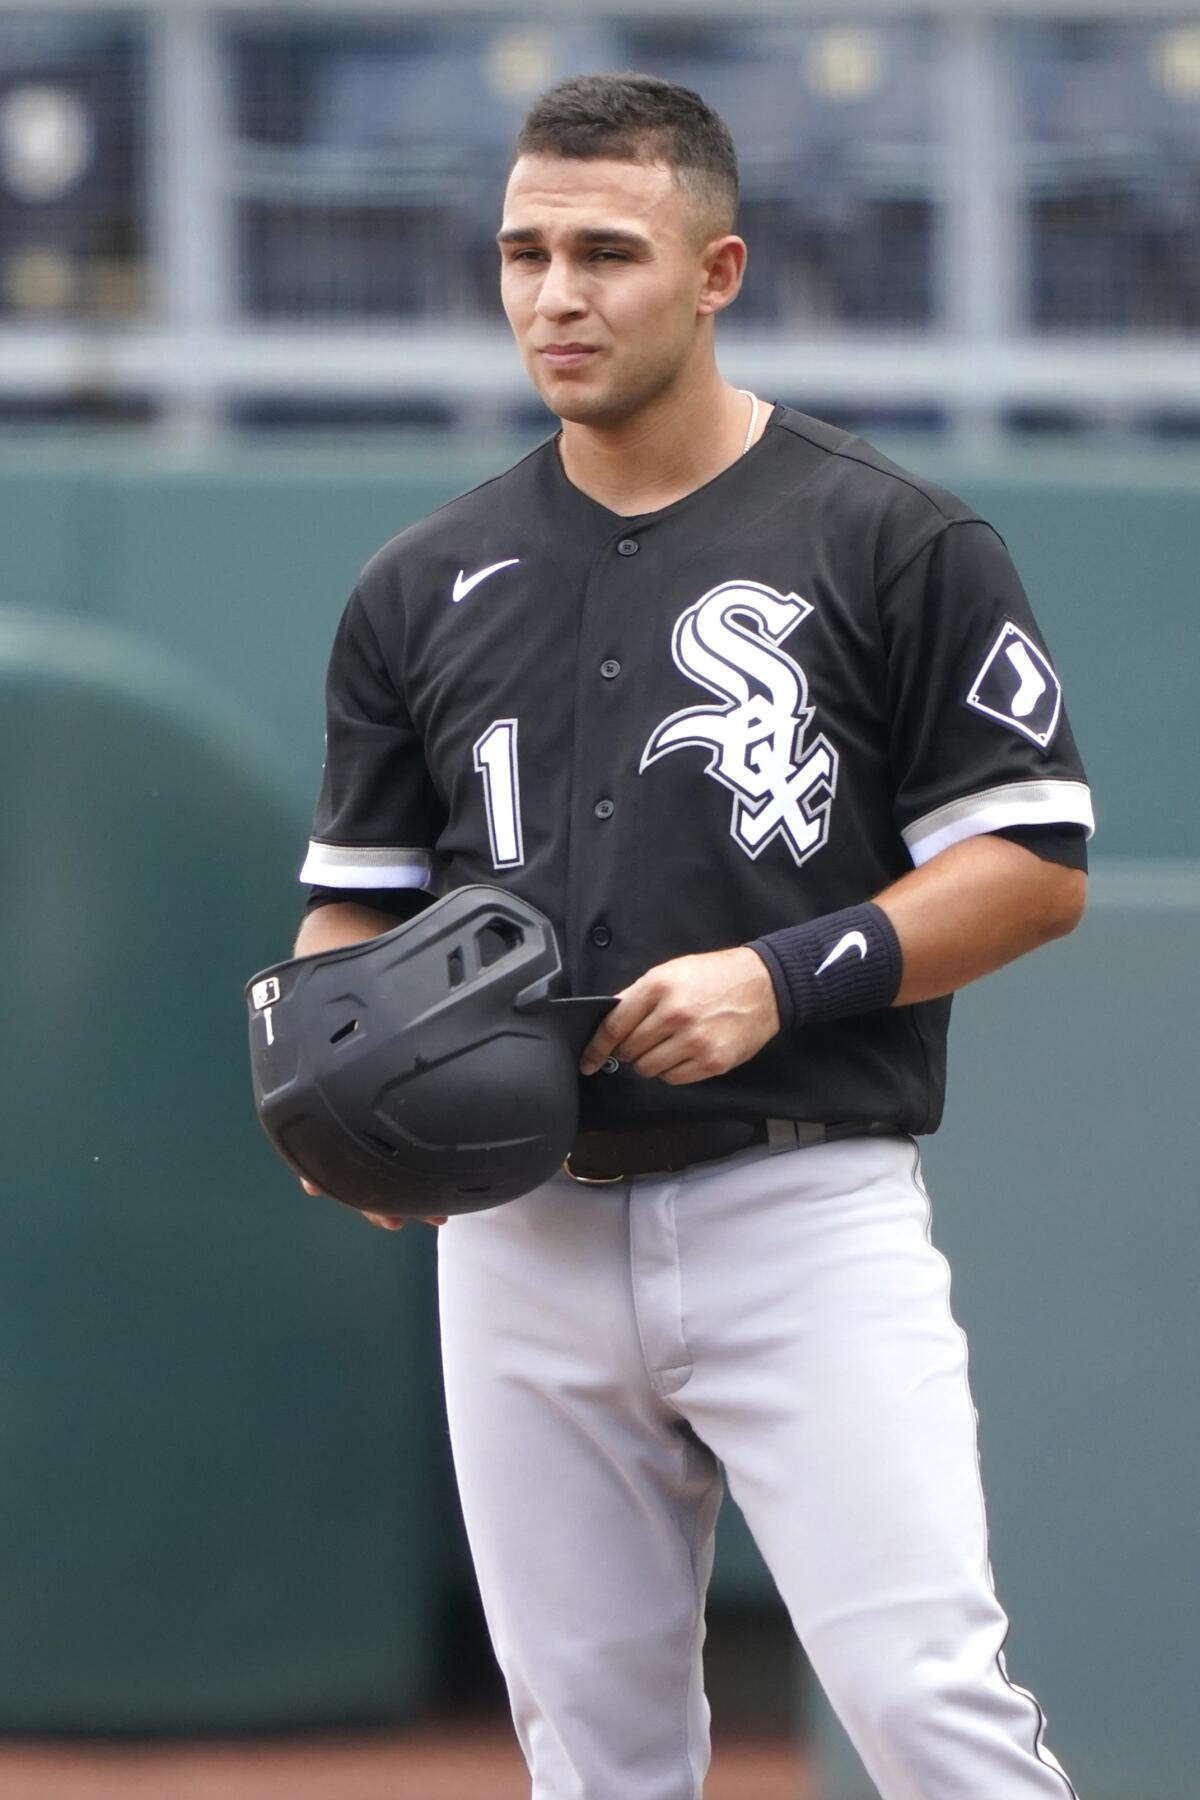 Chicago White Sox summon Nick Madrigal to Major Leagues for debut